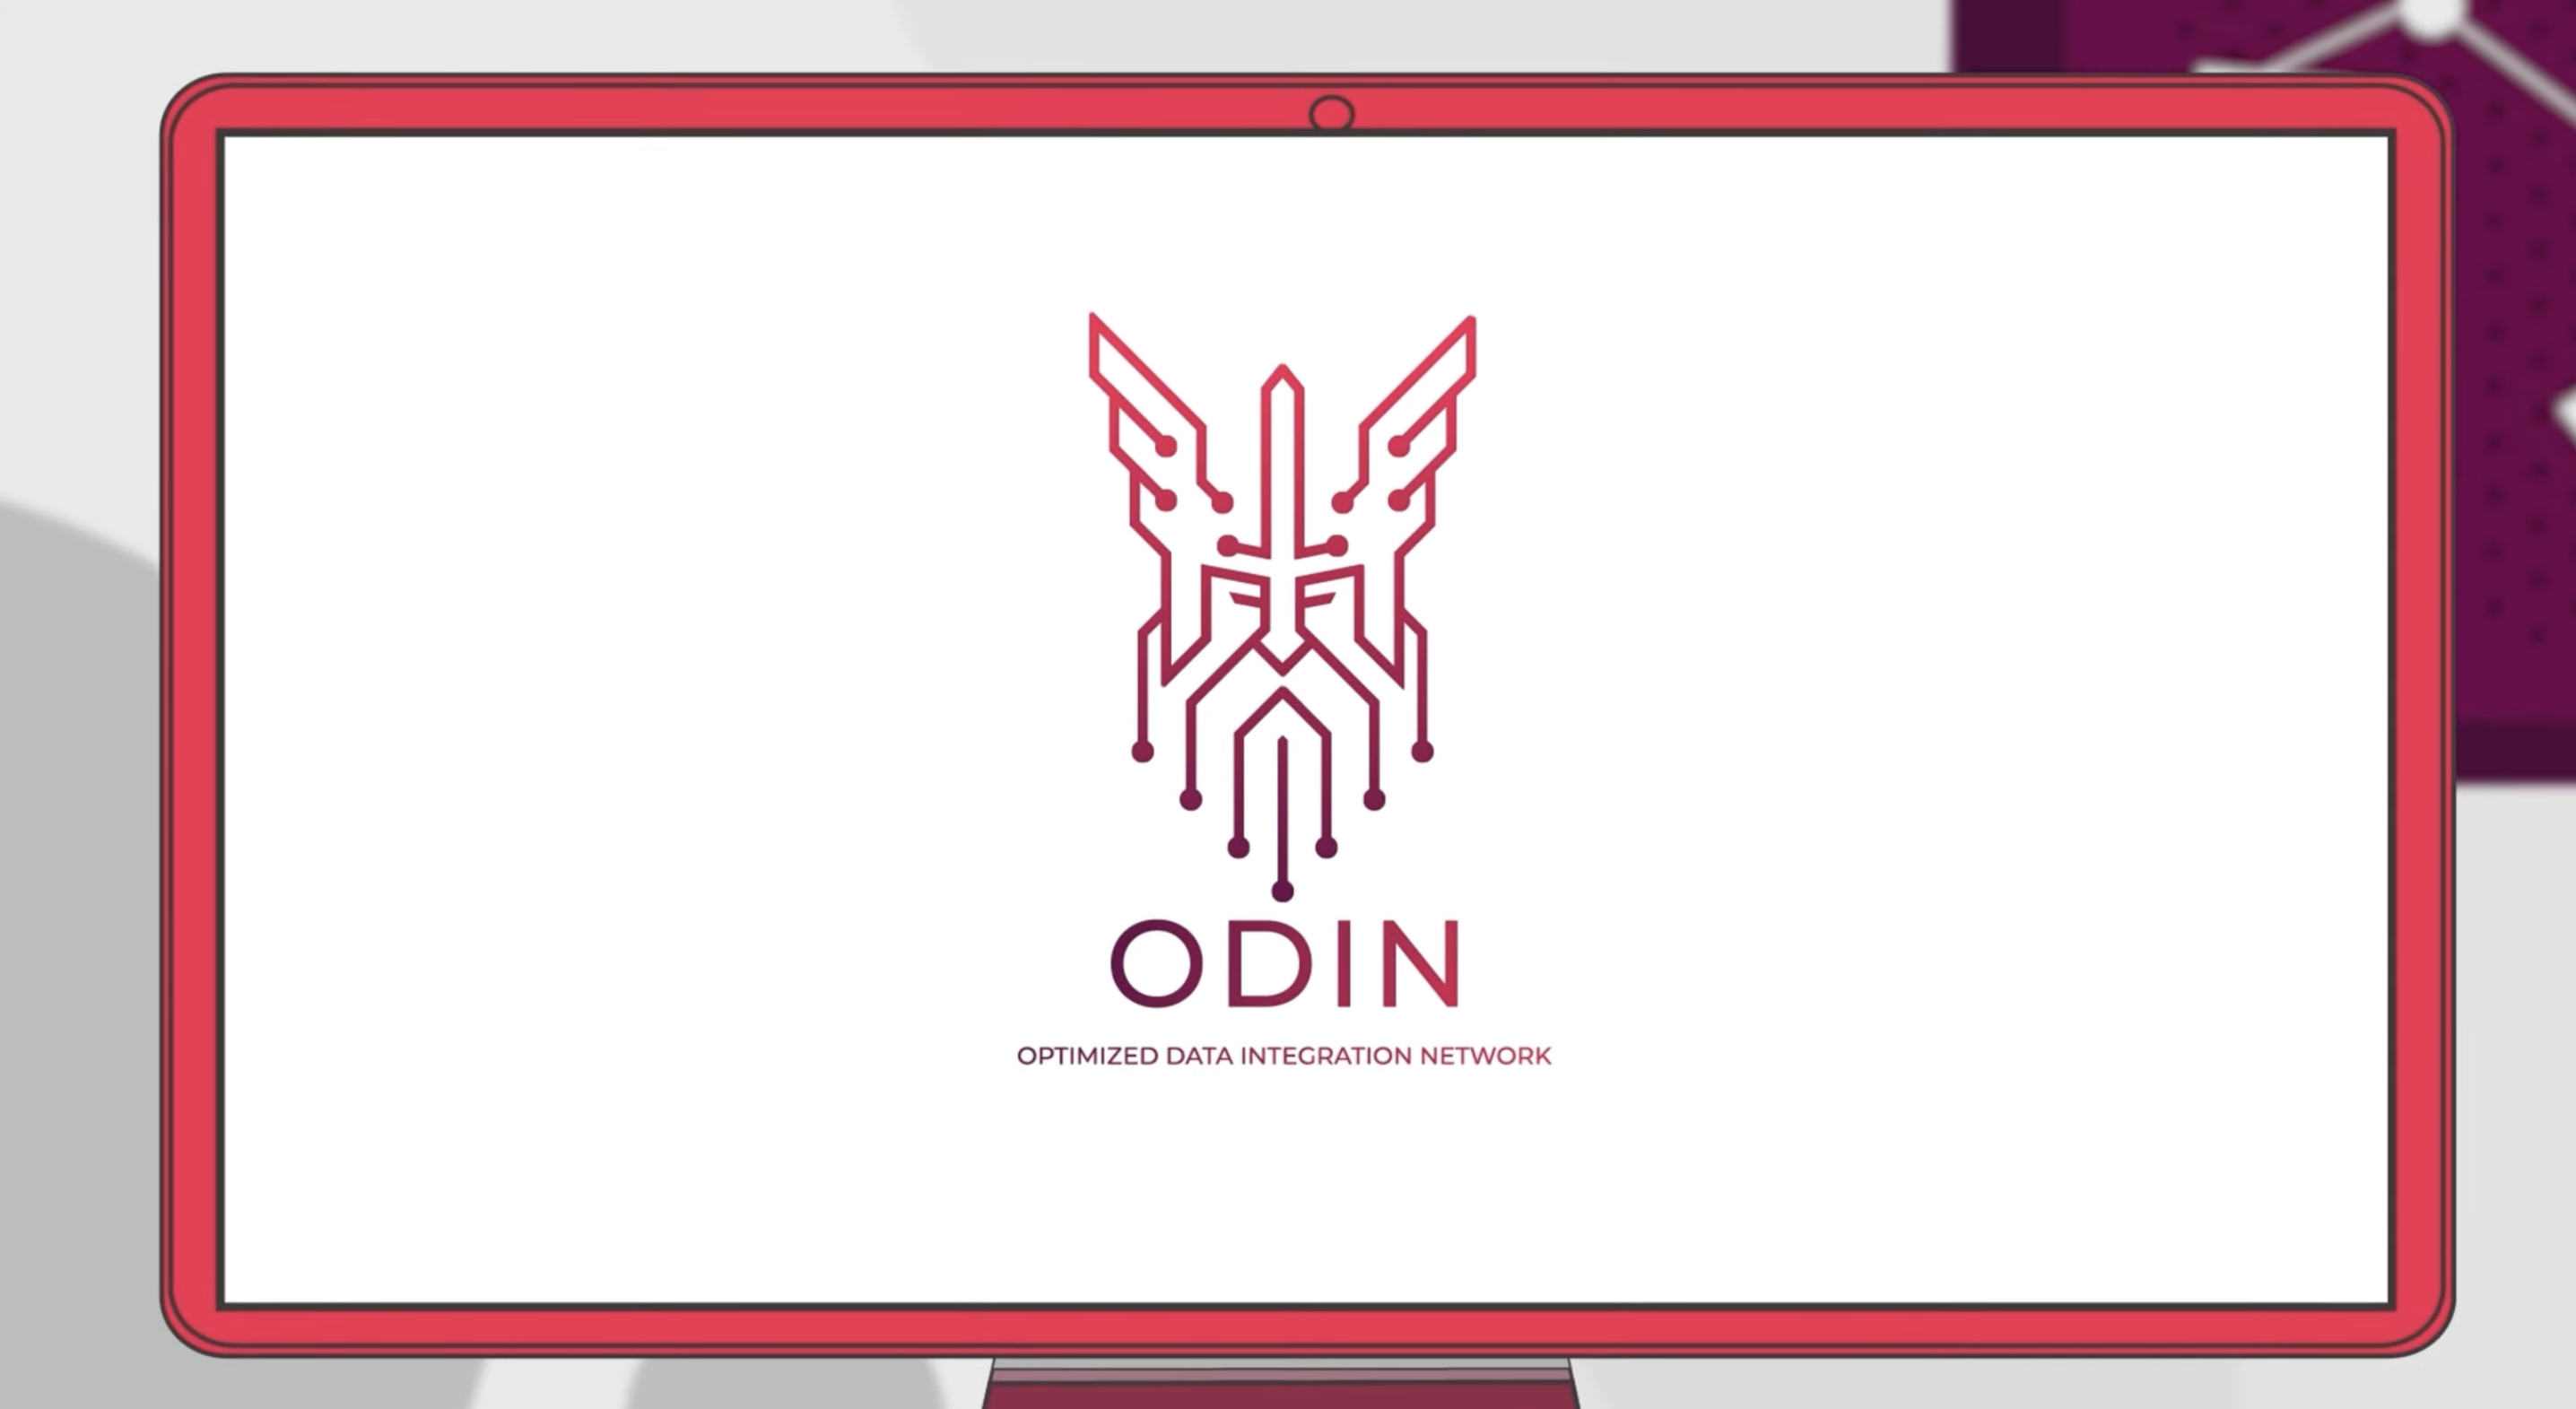 Illustration of the AI tool Odin Project, developed by Colombian media outlet Cuestión Pública.